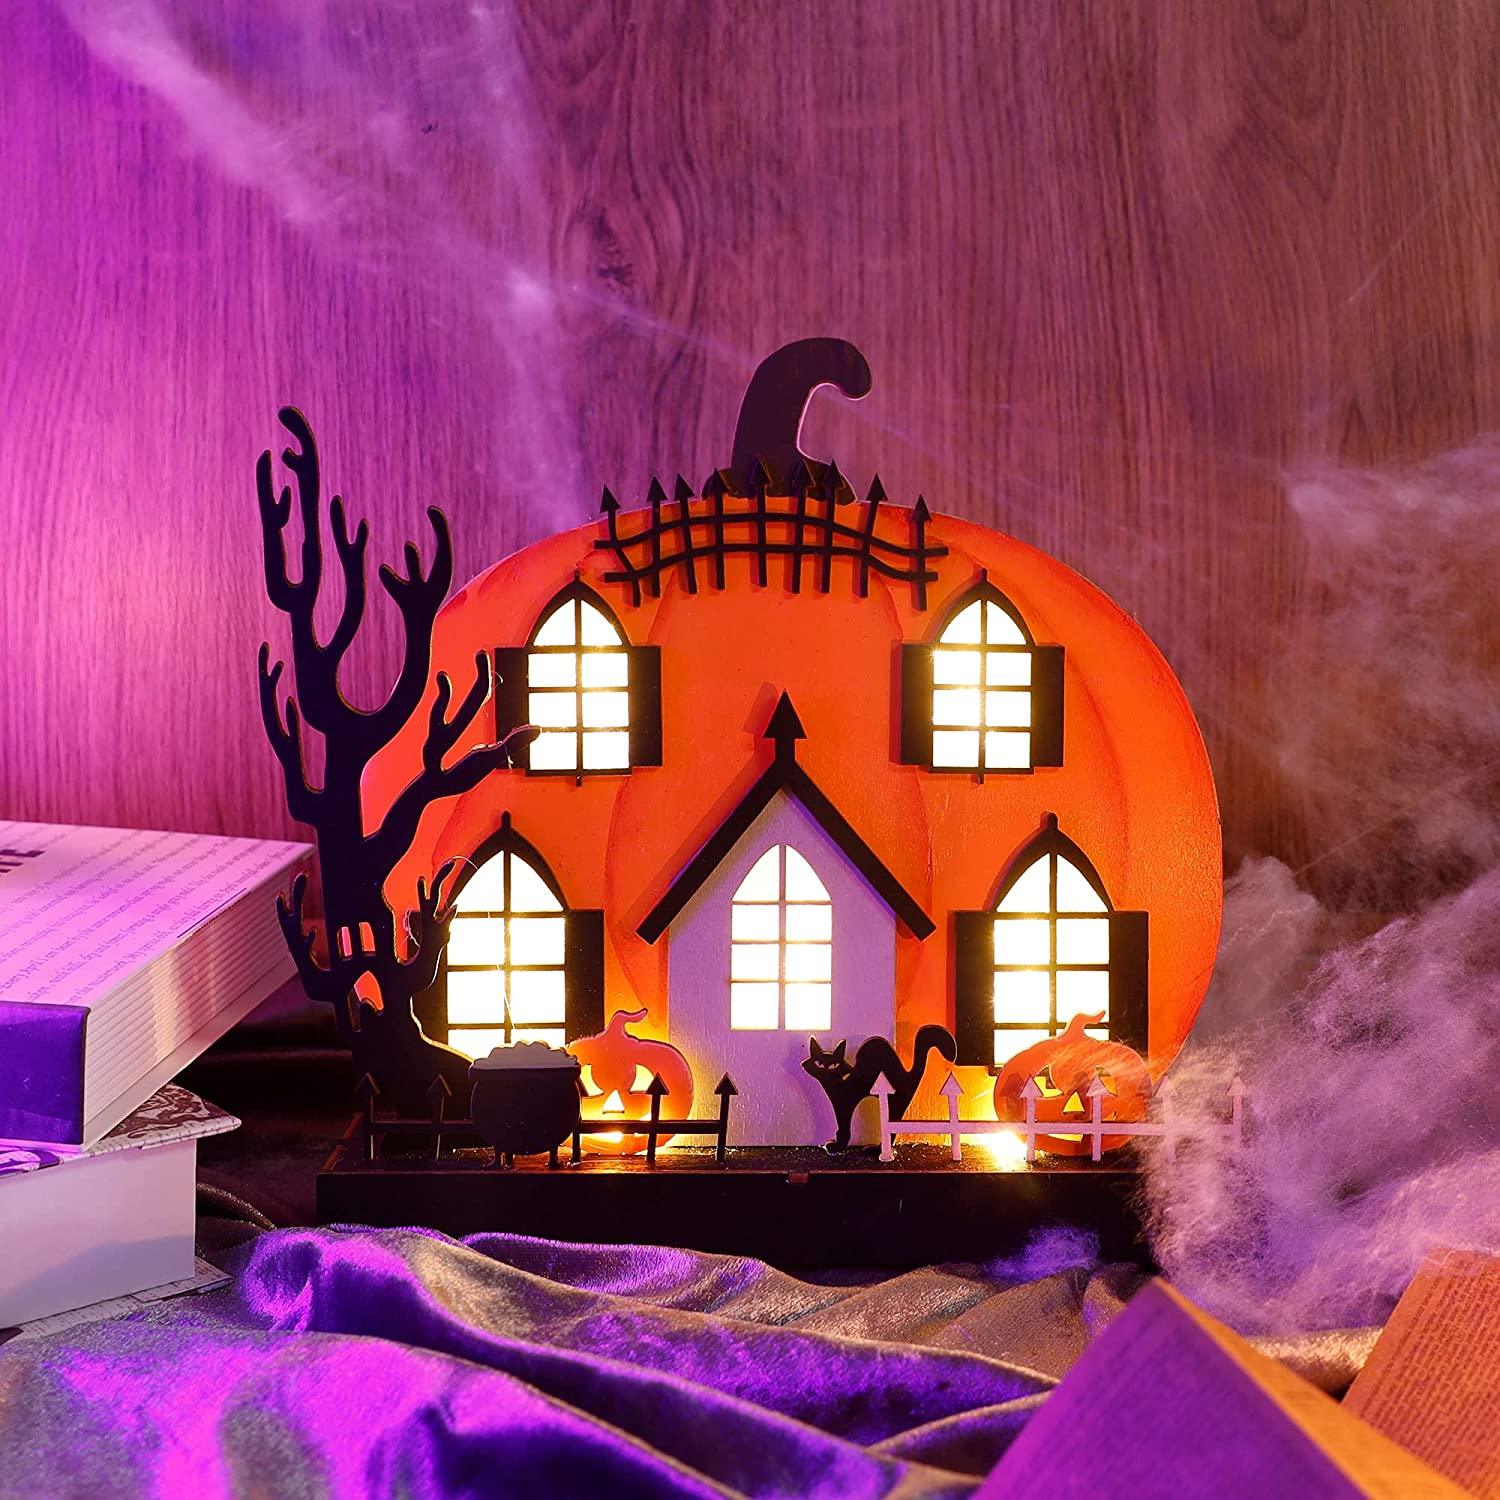 Home Halloween Tabletop Decoration, Wooden Lighted Pumpkin House Decoration - If you say i do